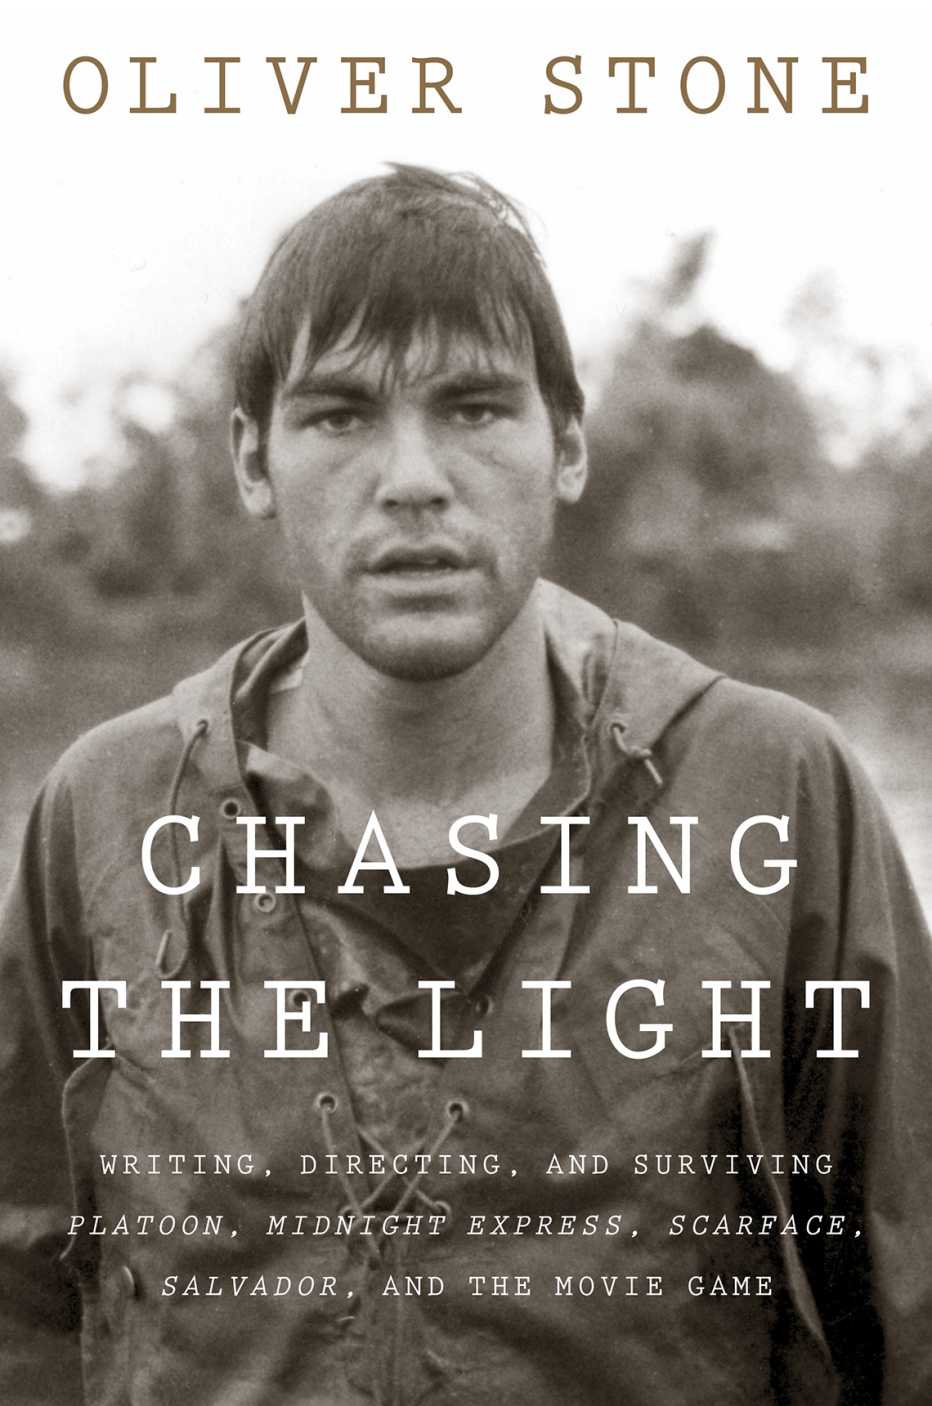 The book cover of the Oliver Stone memoir Chasing the Light 